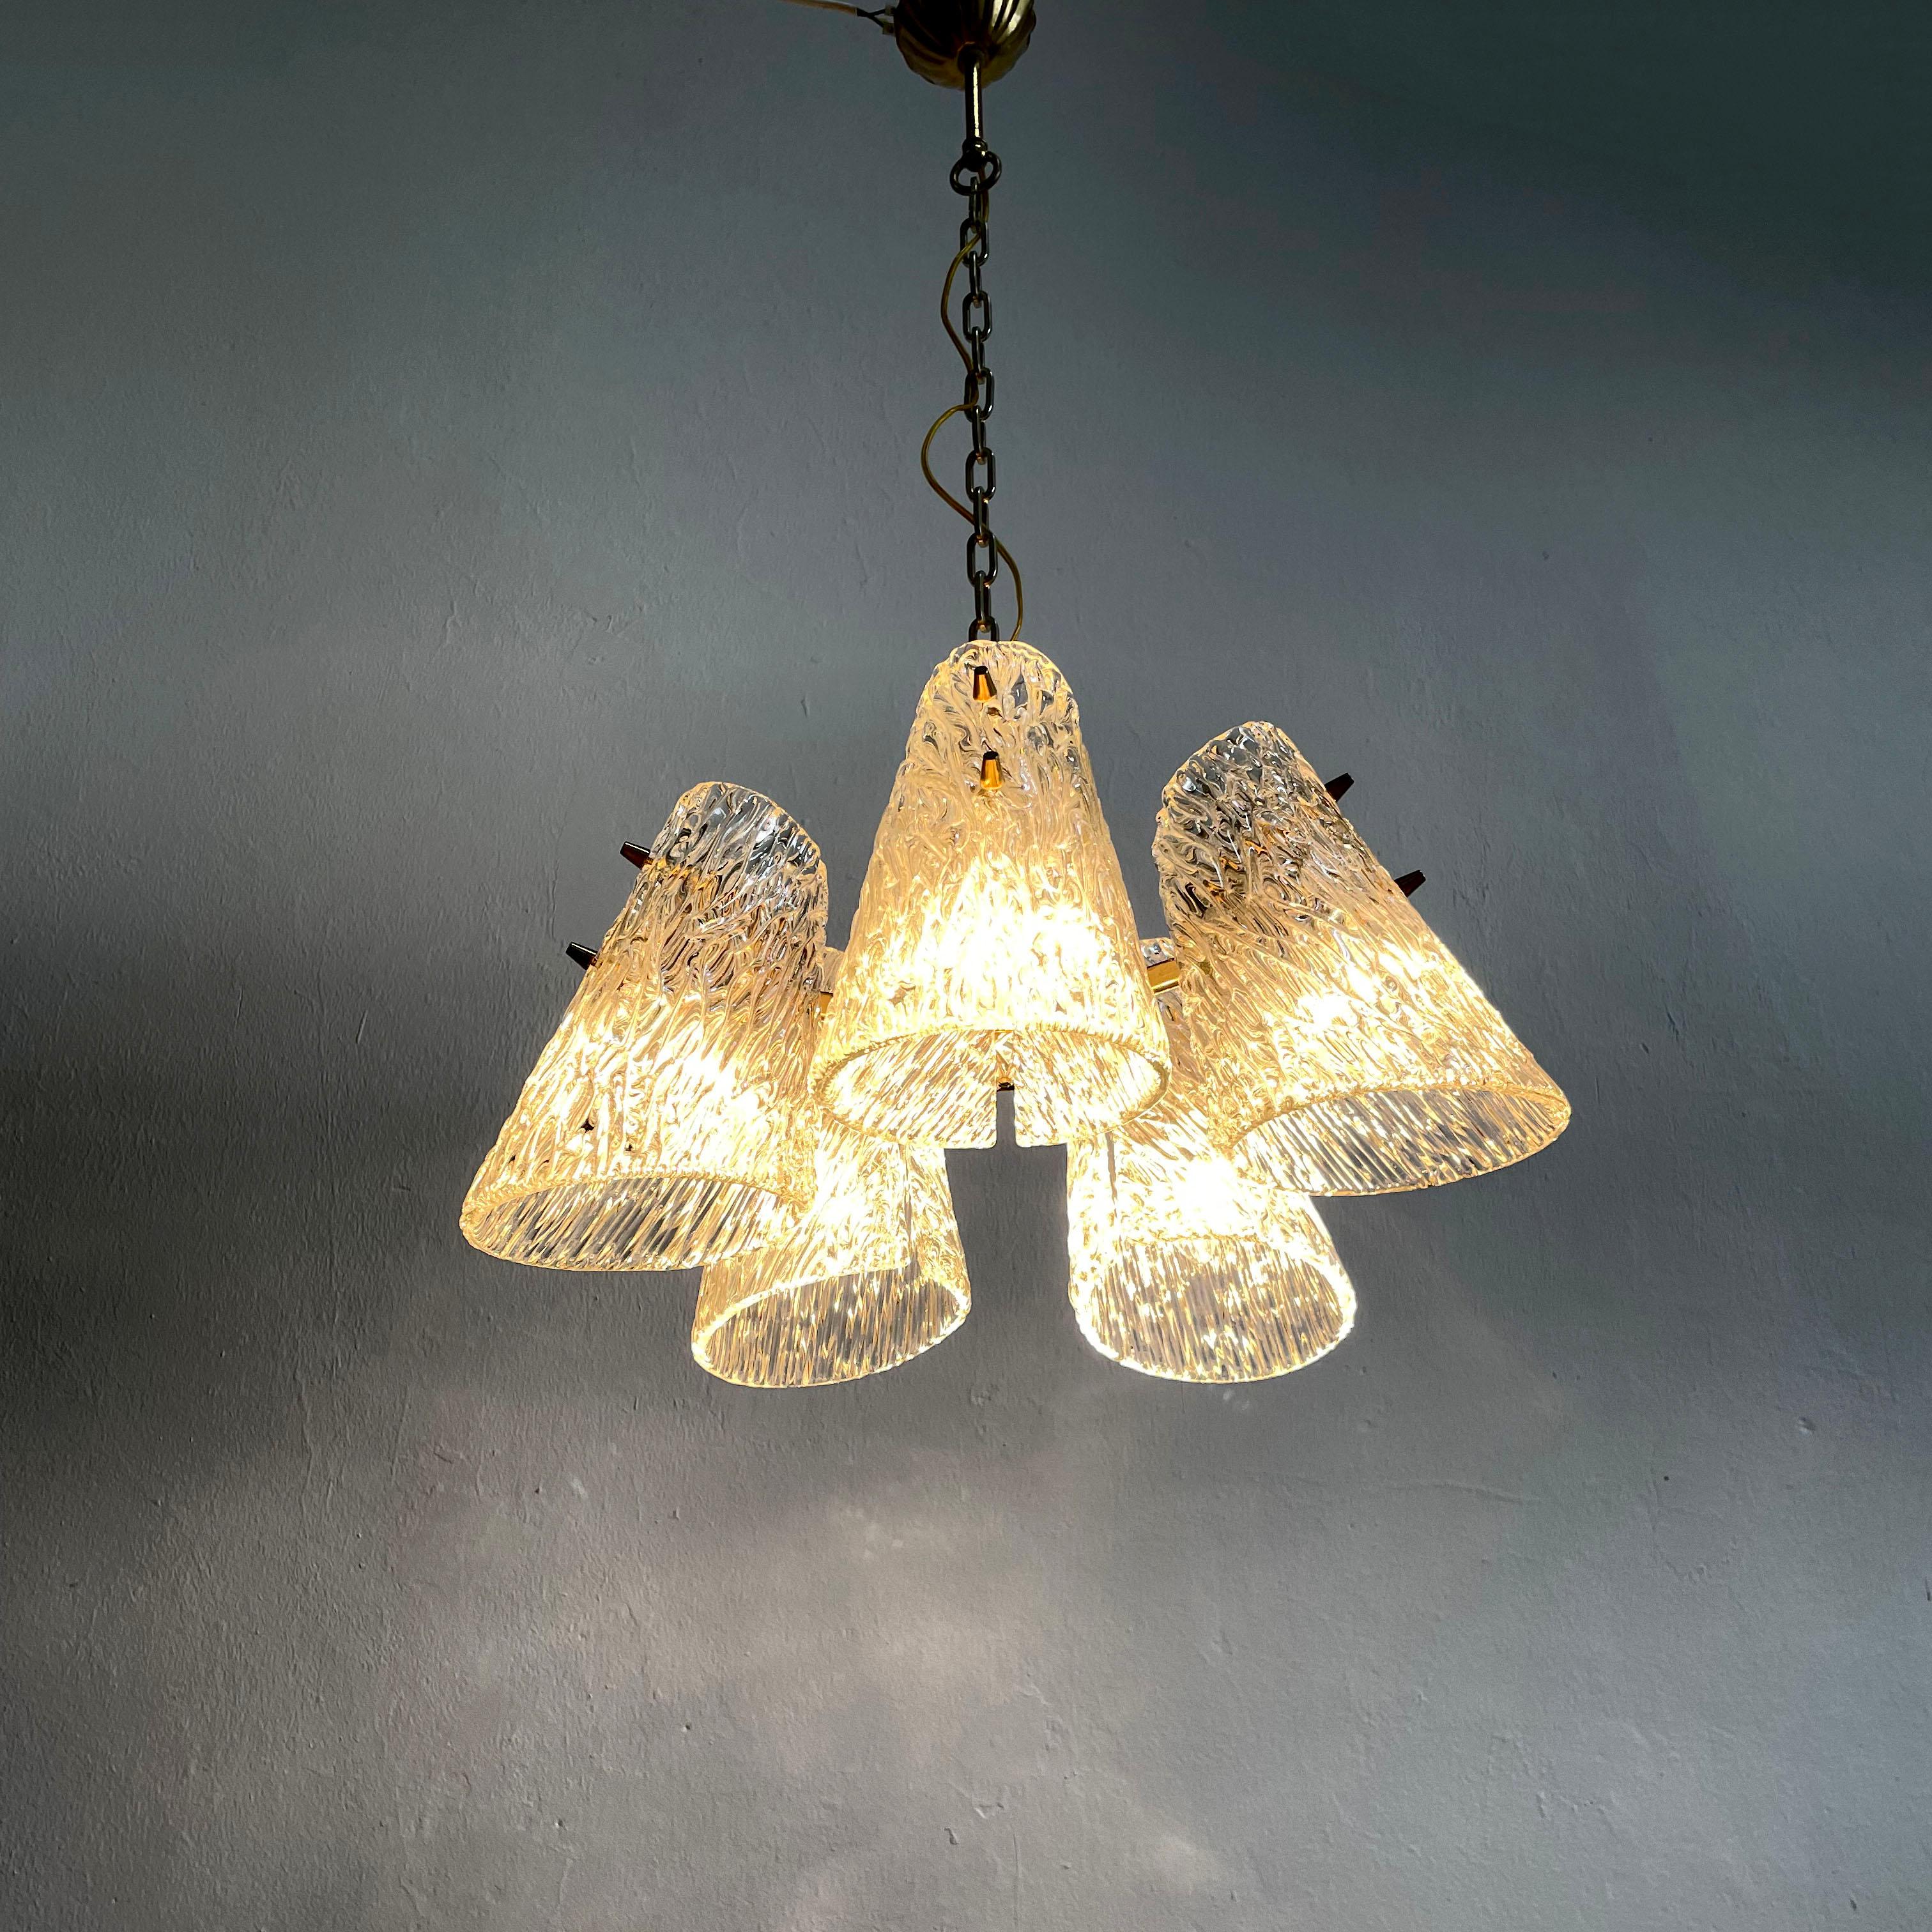 Beautiful and luxurious 1960's chandelier / pendant light by J.T. Kalmar, Austria, manufactured in midcentury, circa 1960 (late 1950s or early 1960s).

The chandelier is made of textured glass and brass

A five-arm brass frame holds cone shaped